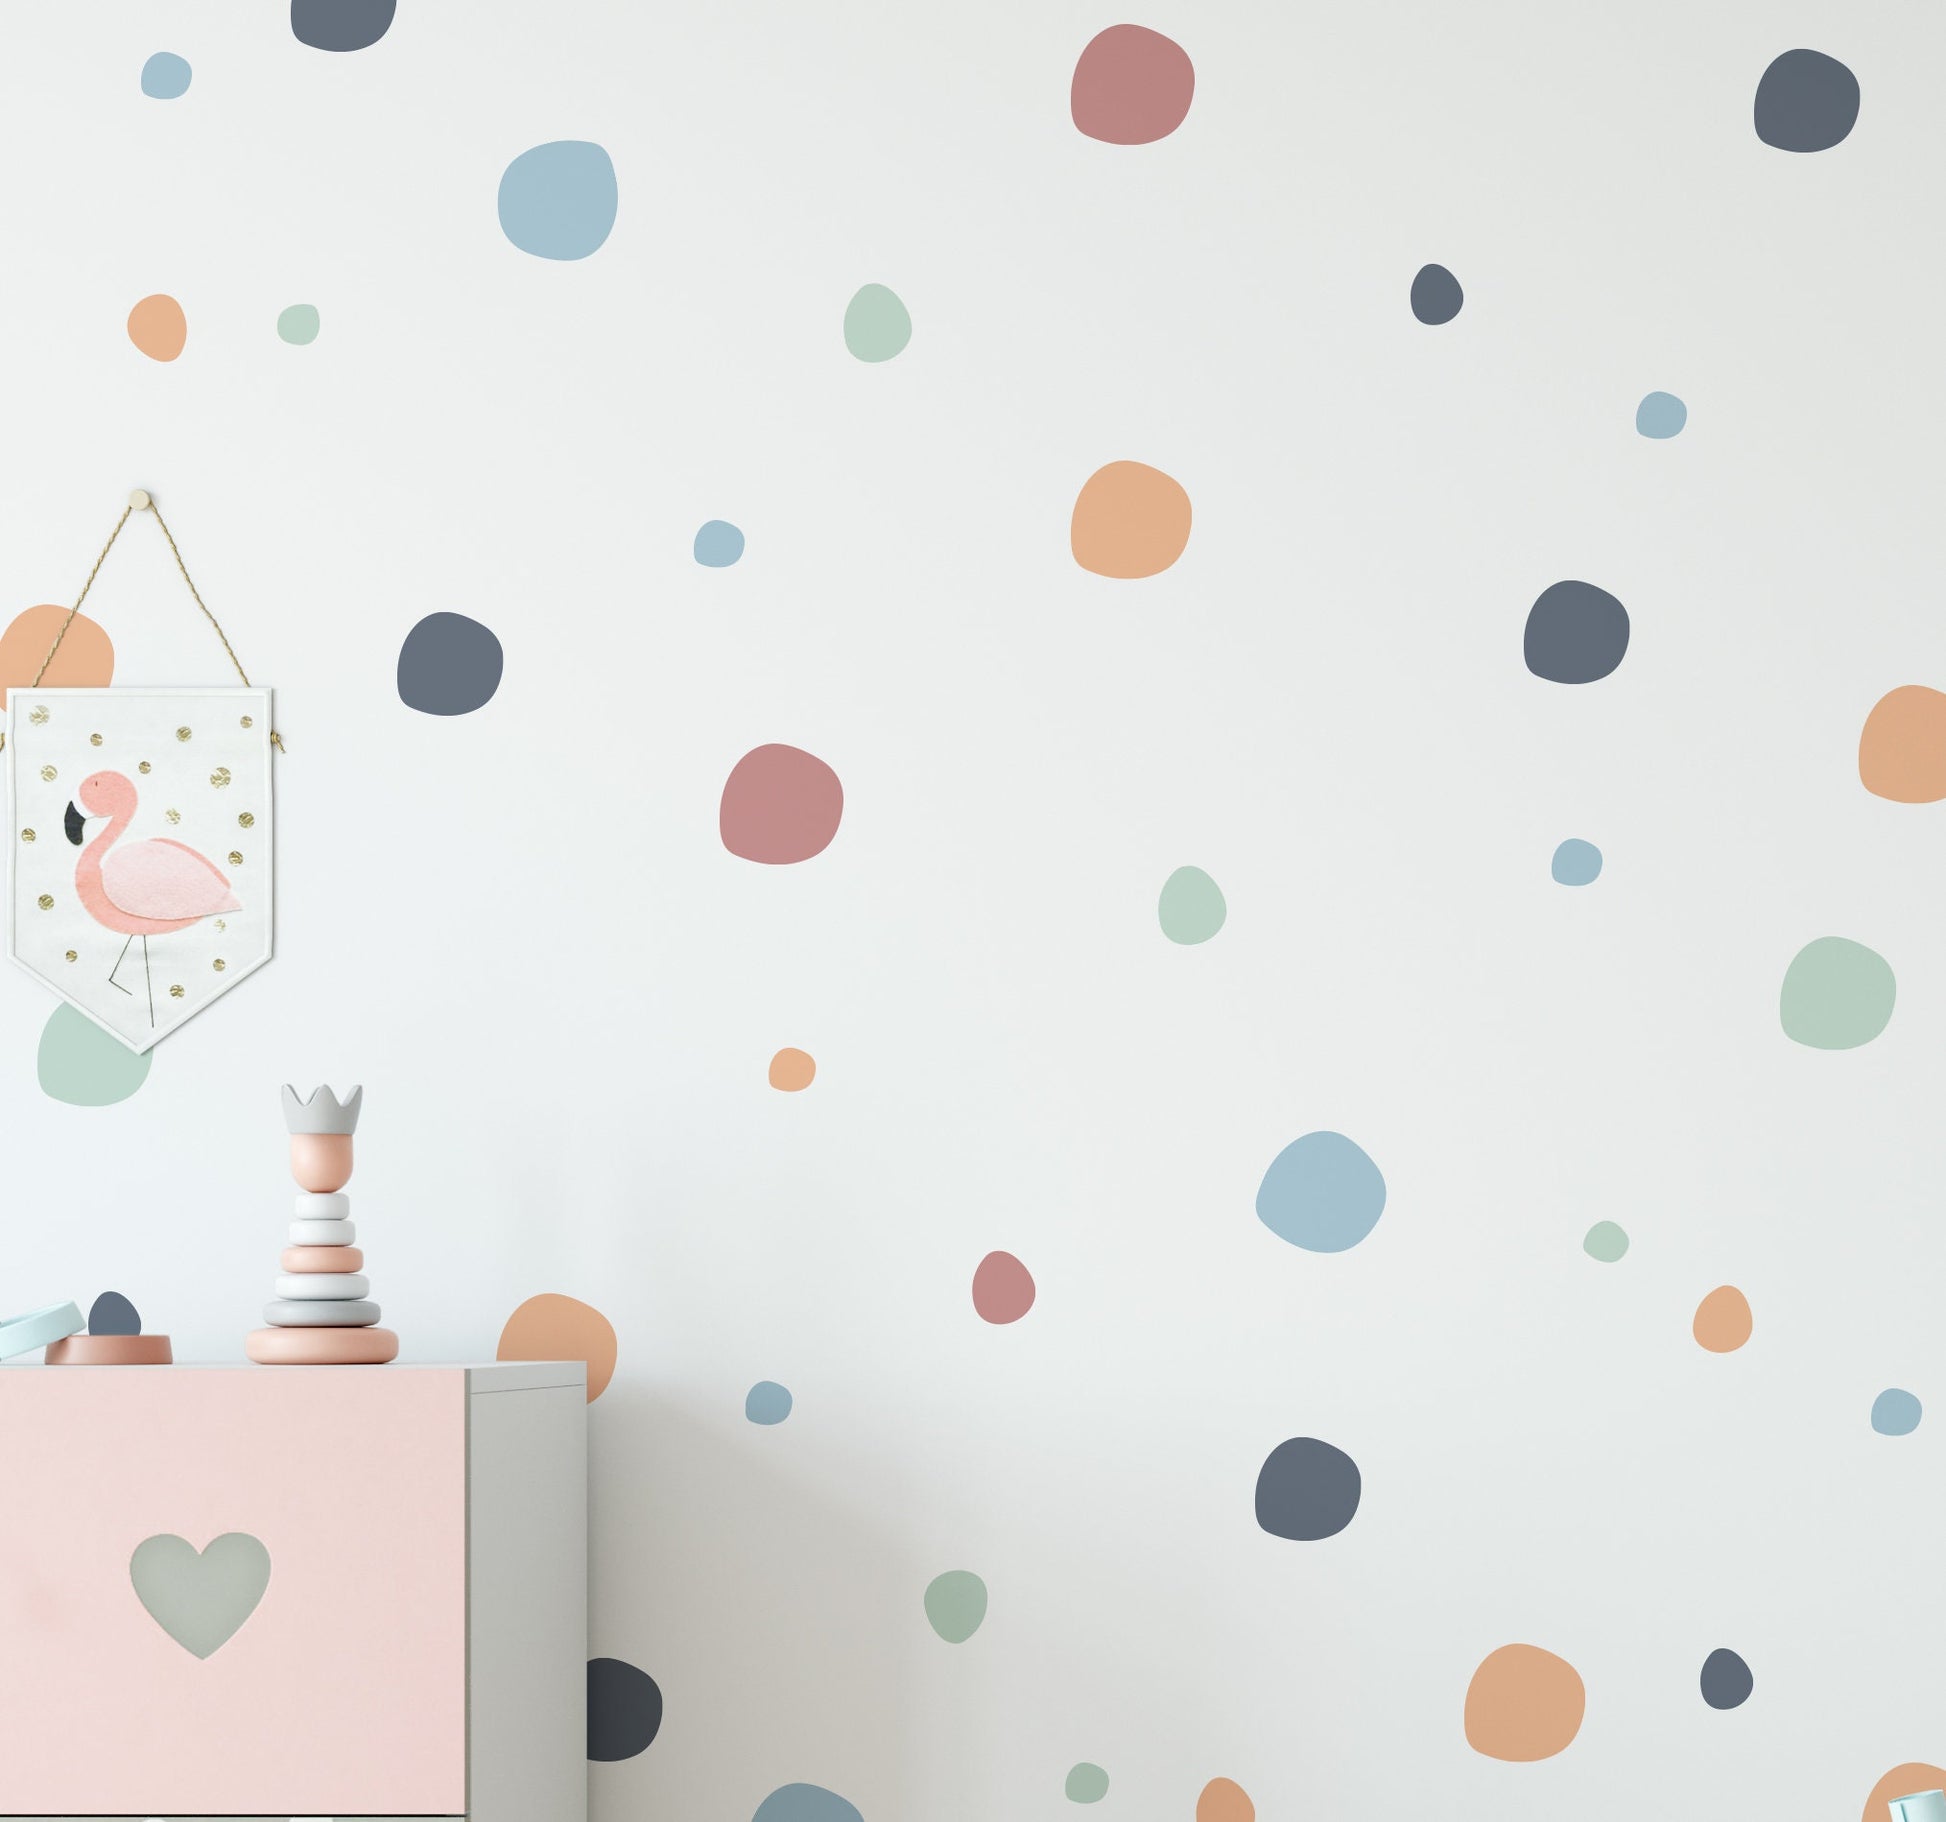 150 PVC-Free Boho Chic Irregular Polka Dot Wall Stickers for Kids’ Bedrooms, Nursery, Playrooms, Baby | Peel & Stick Reusable Wall Decals